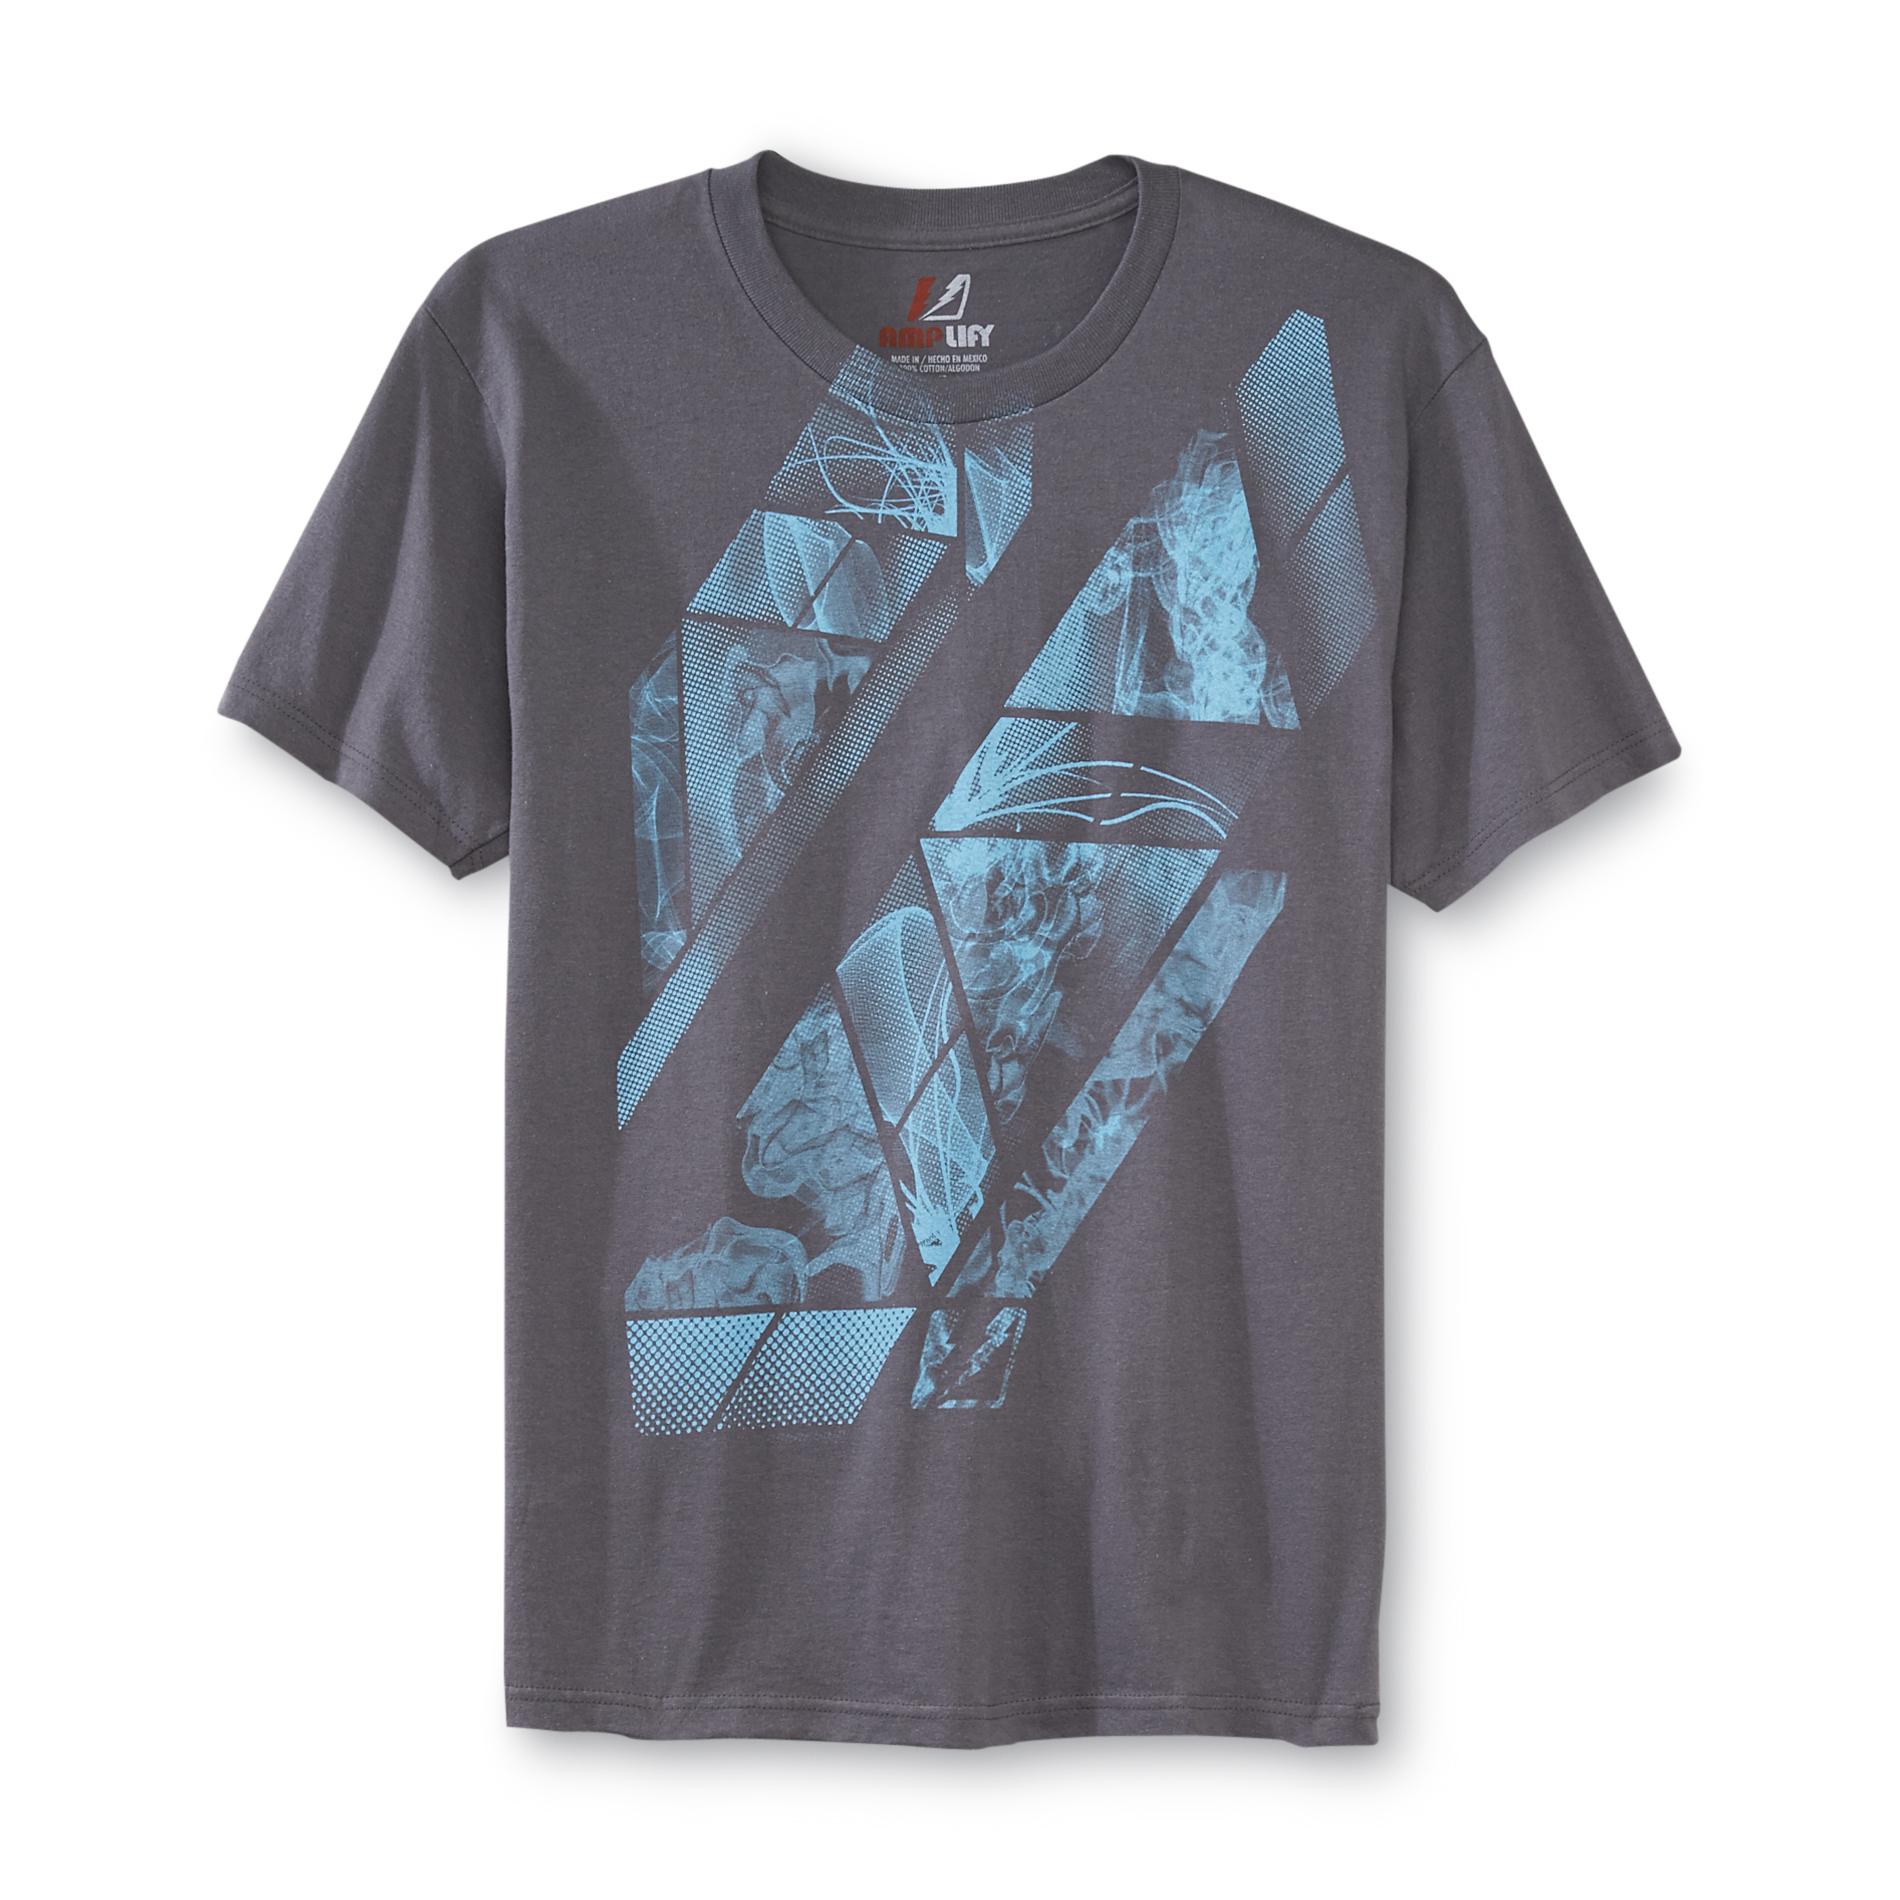 Amplify Young Men's Graphic T-Shirt - Abstract